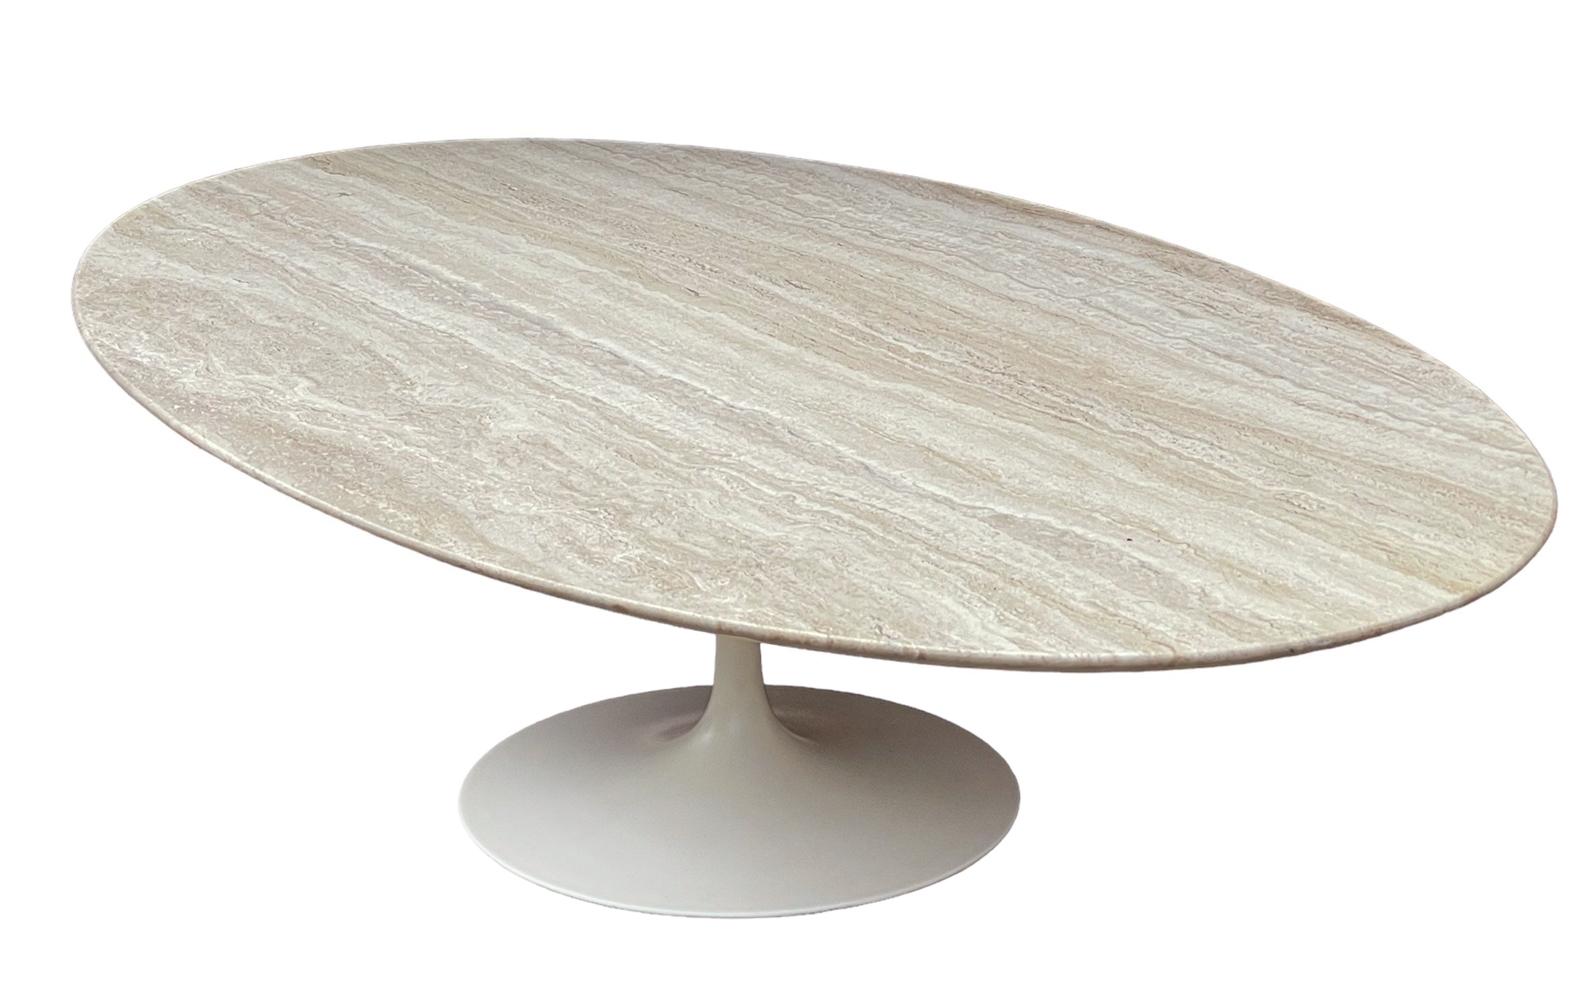 Mid-20th Century Mid Century Modern Oval Travertine Marble Cocktail Table by Saarinen for Knoll  For Sale